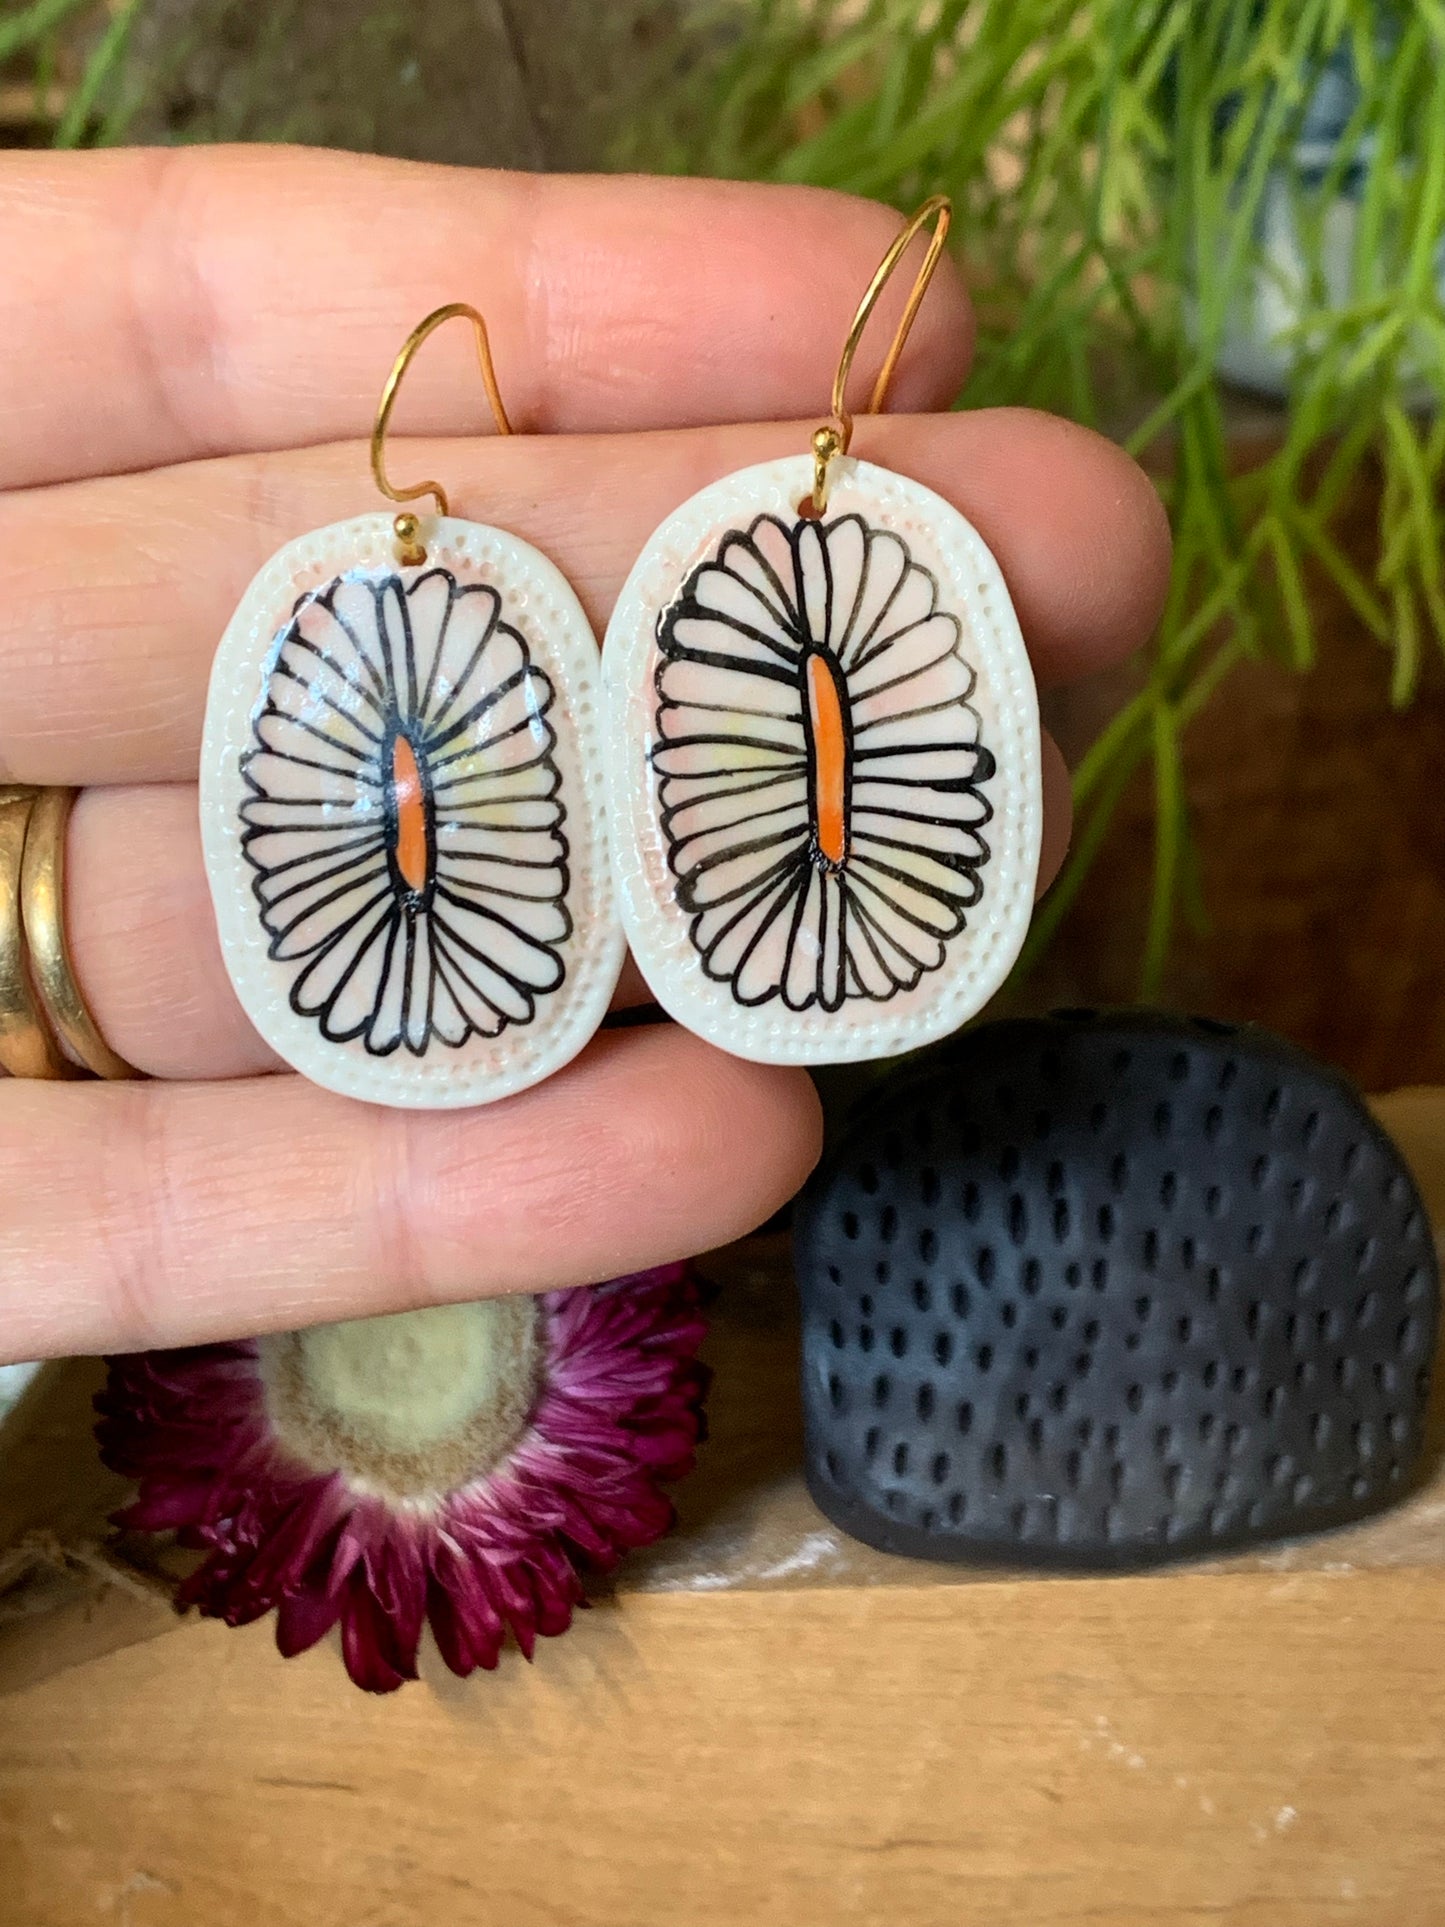 One pair of Hand painted porcelain ‘Daisy’ earrings